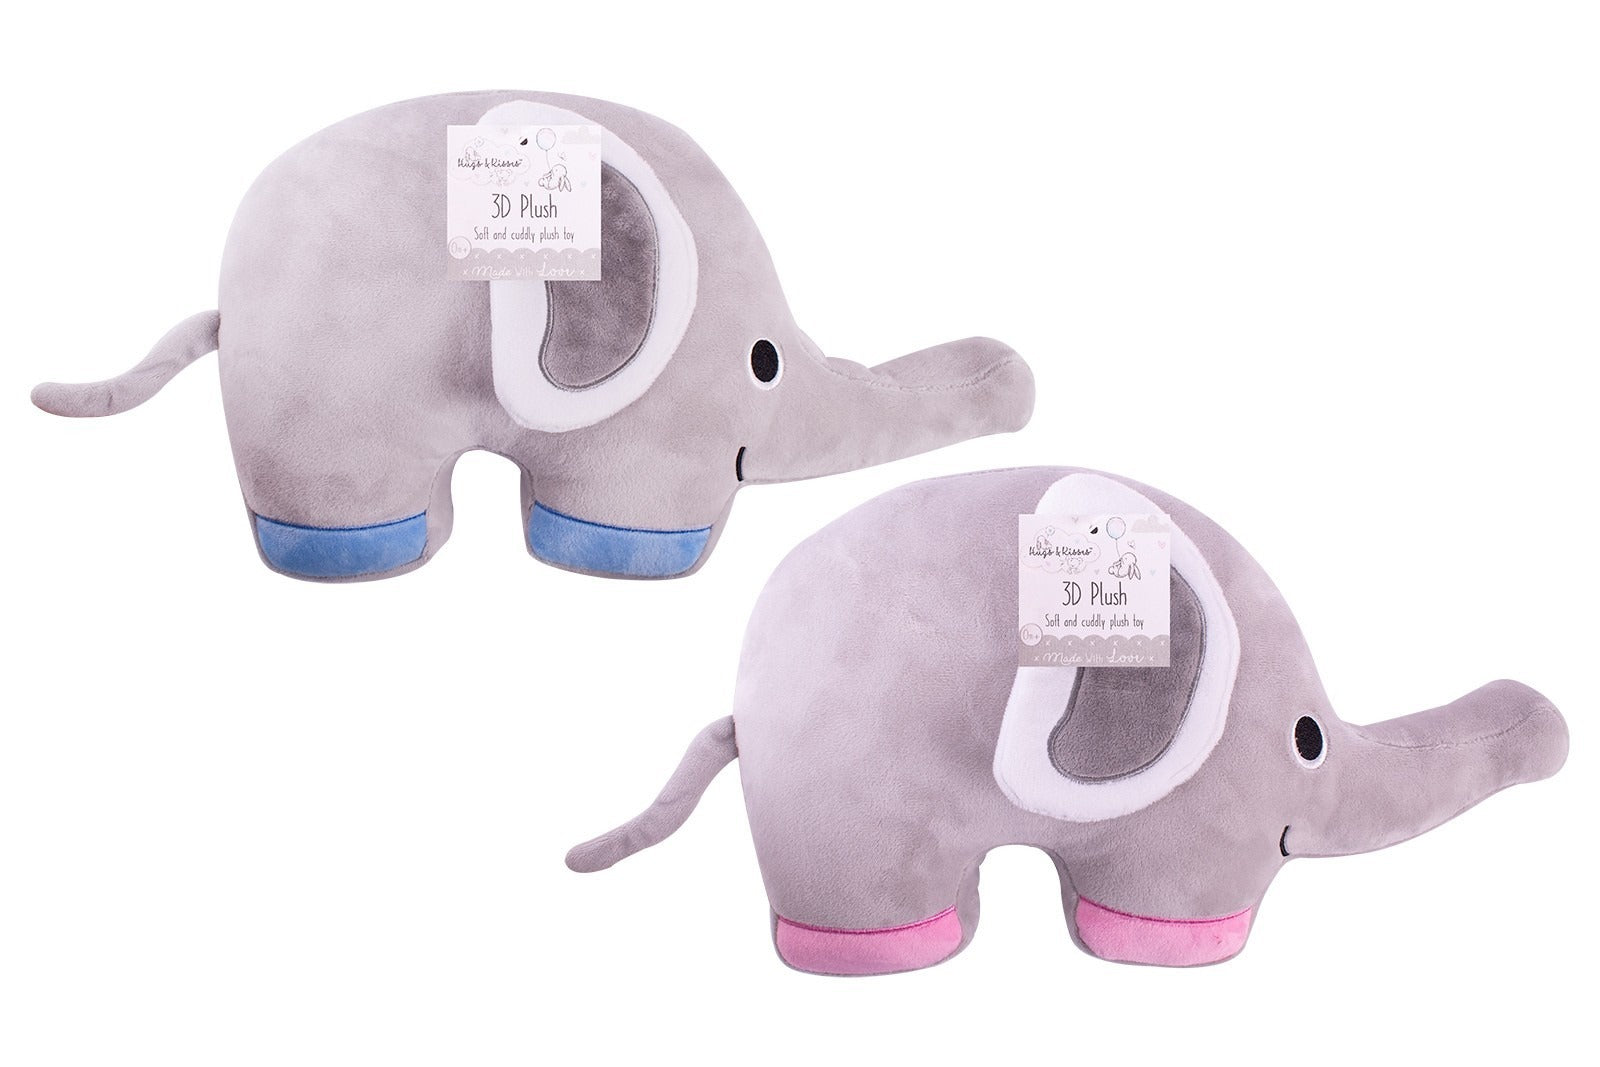 View Large 3D Plush Elephant Assorted information